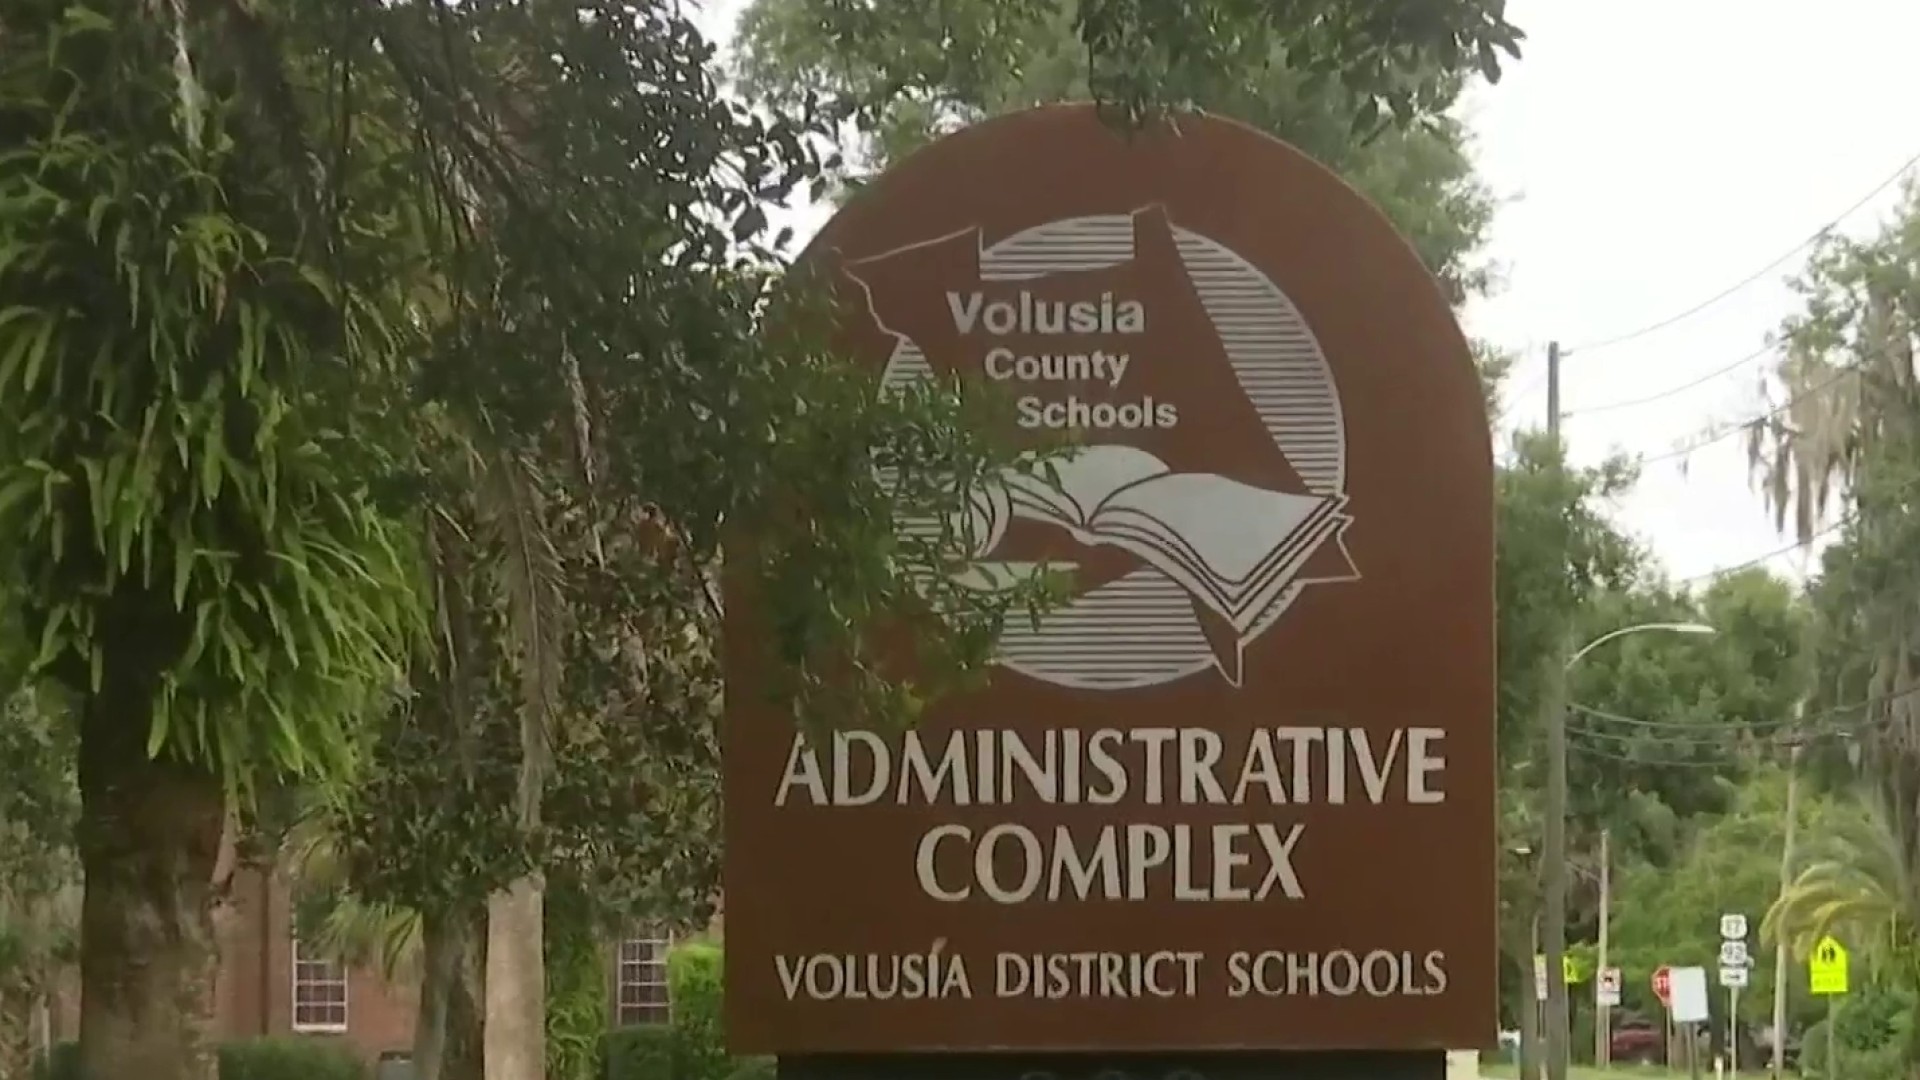 Volusia County School Calendar 2022 2023 With Holidays